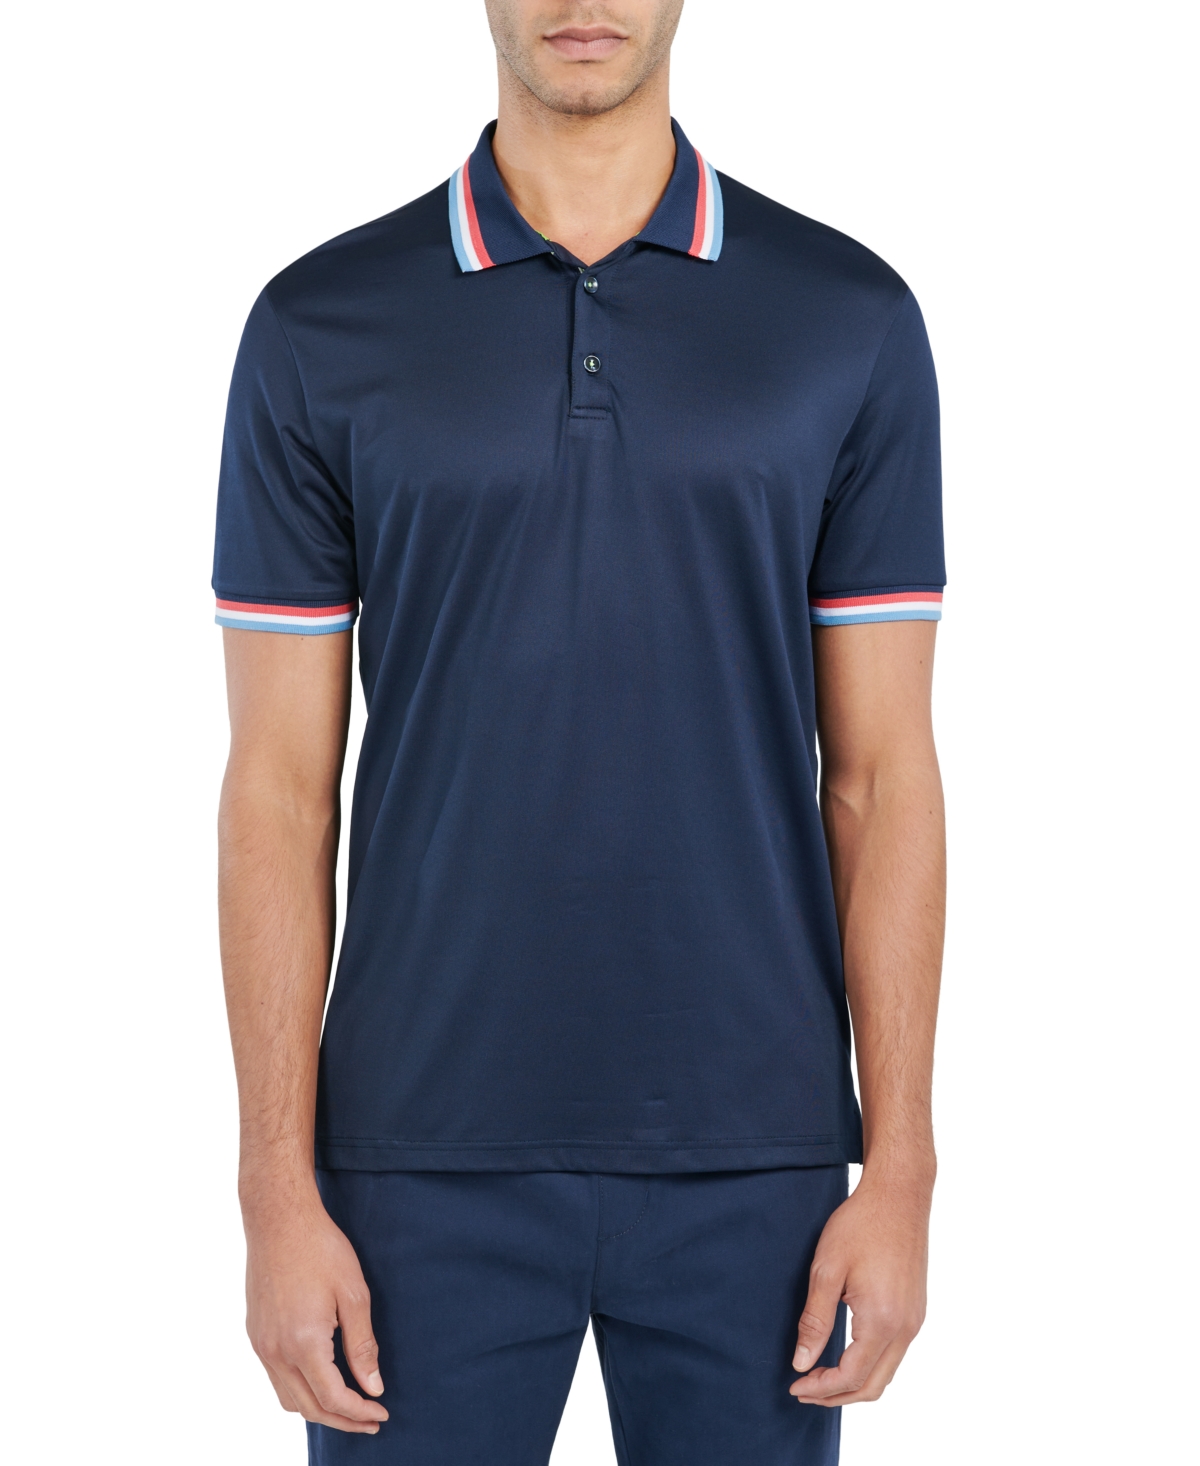 Men's Slim Fit Solid Tipped Performance Polo - Navy